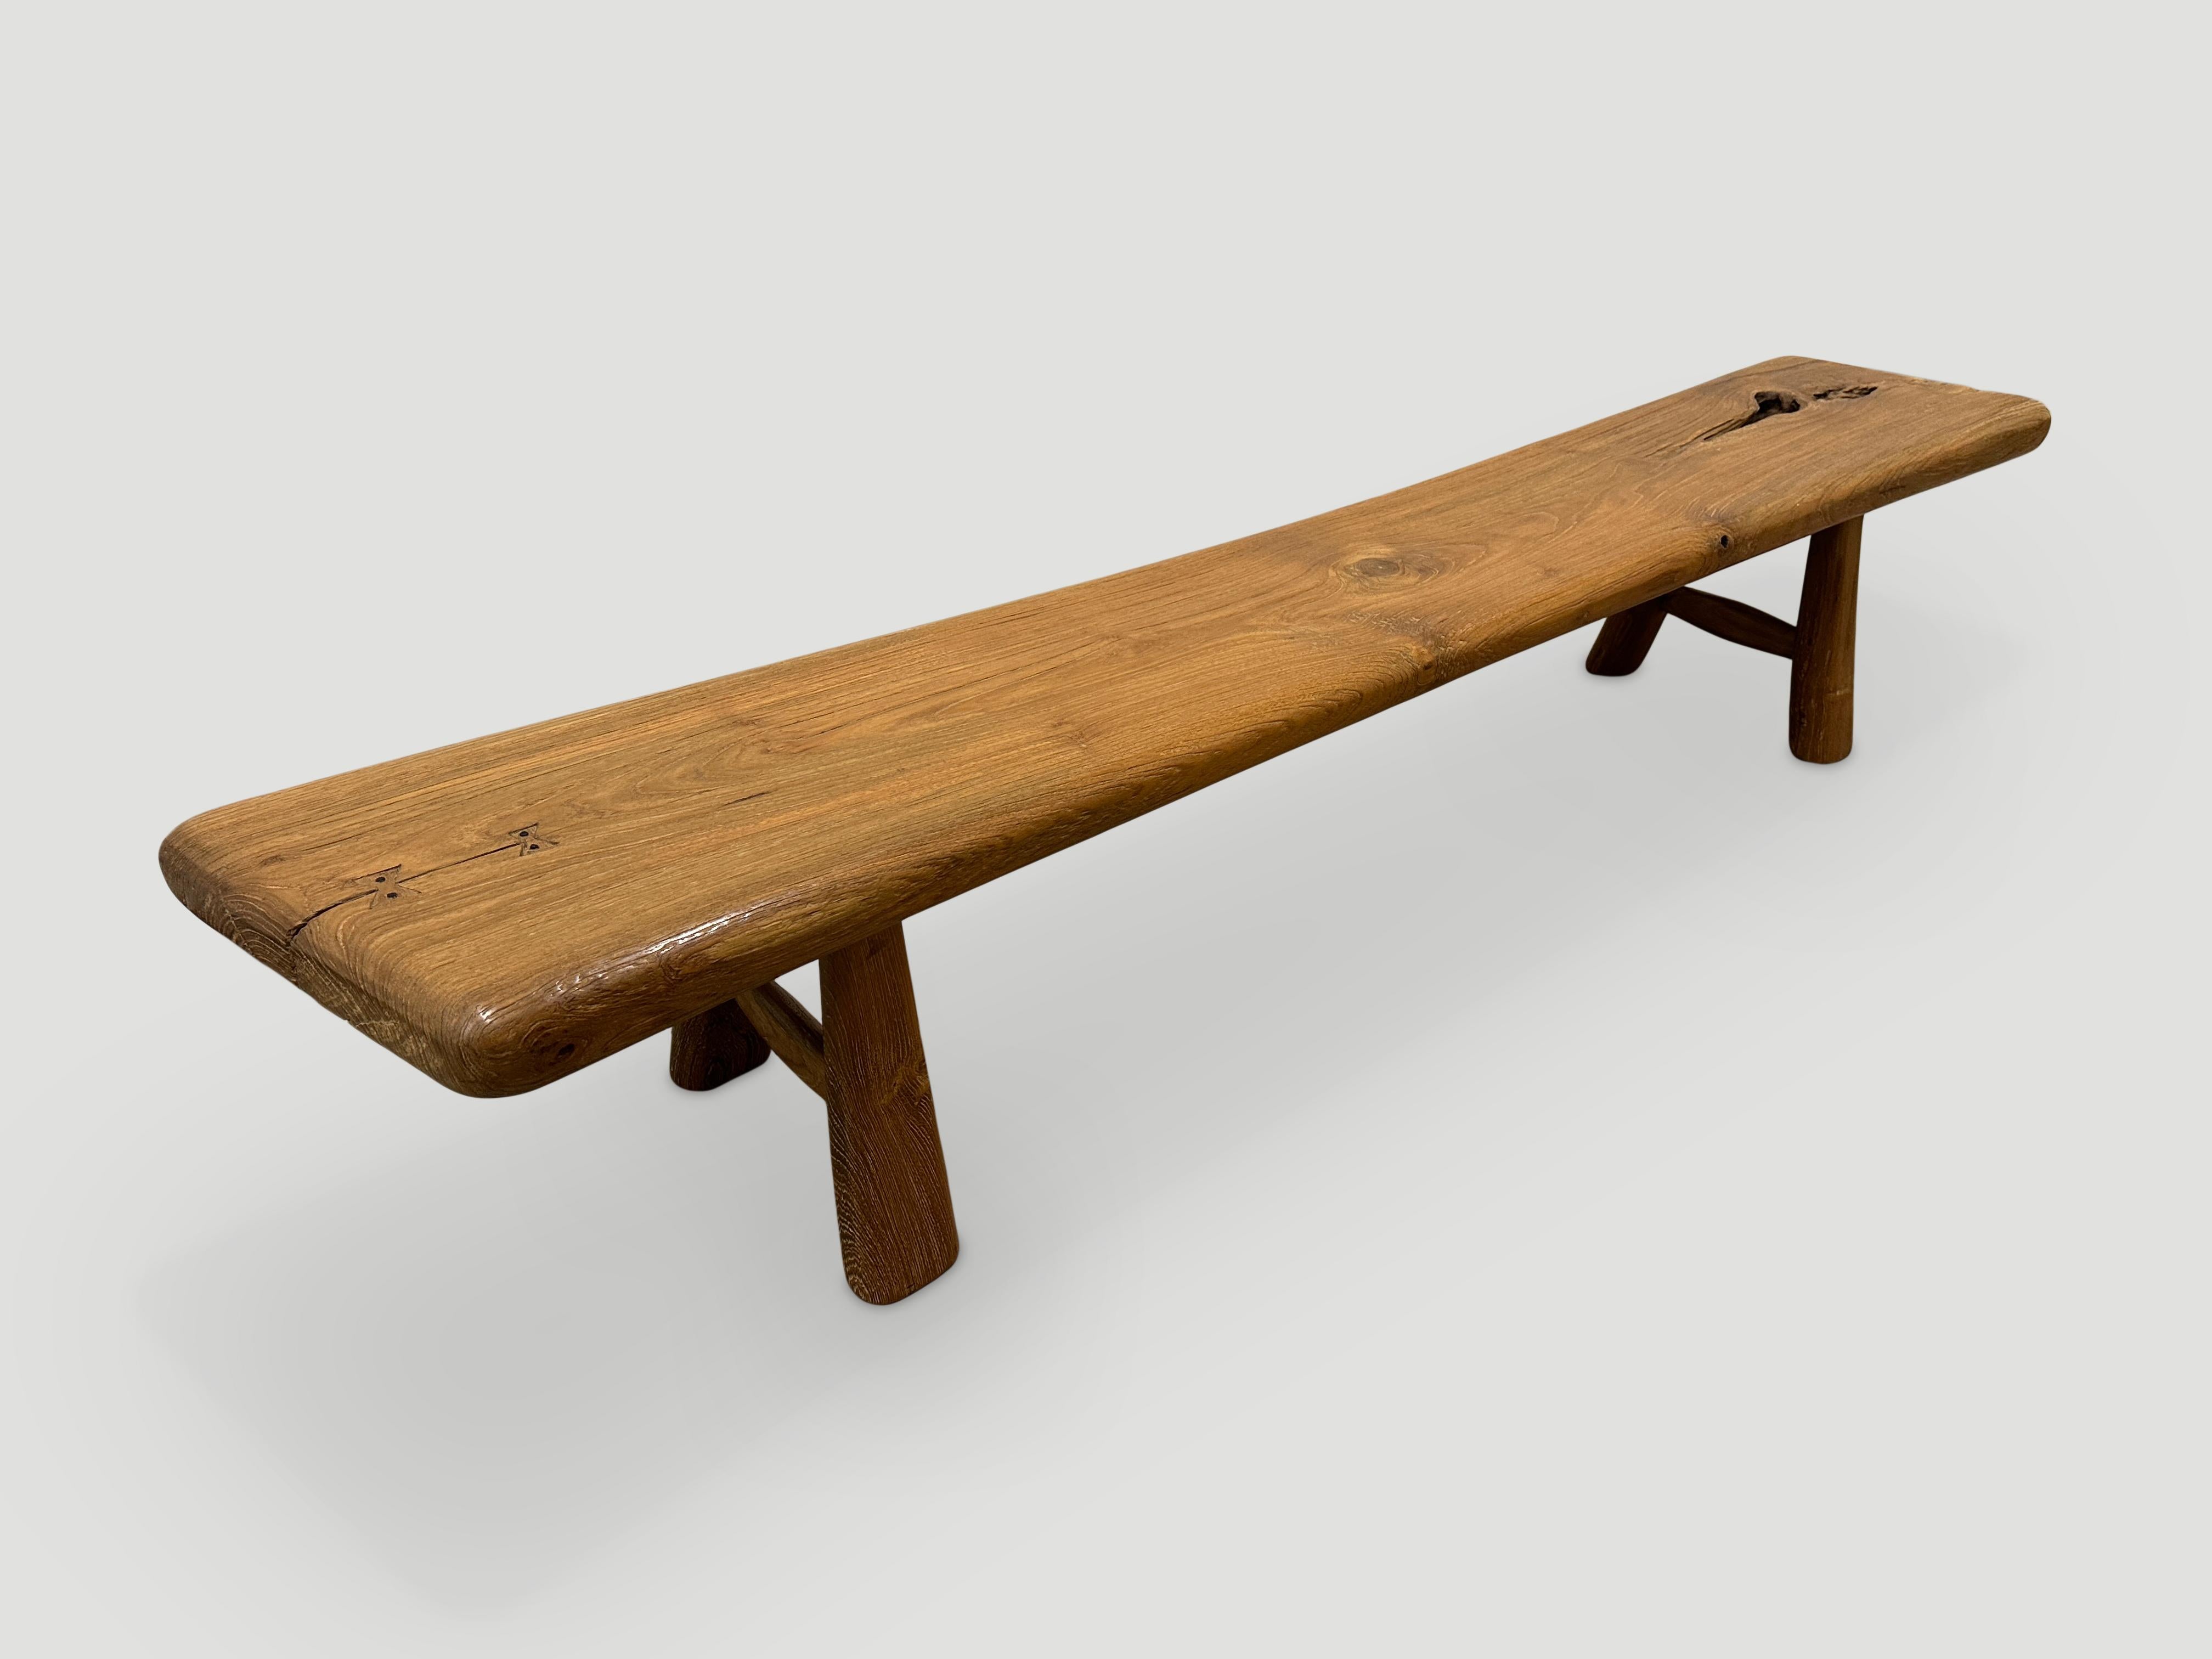 Andrianna Shamaris Midcentury Couture Bench In Excellent Condition For Sale In New York, NY